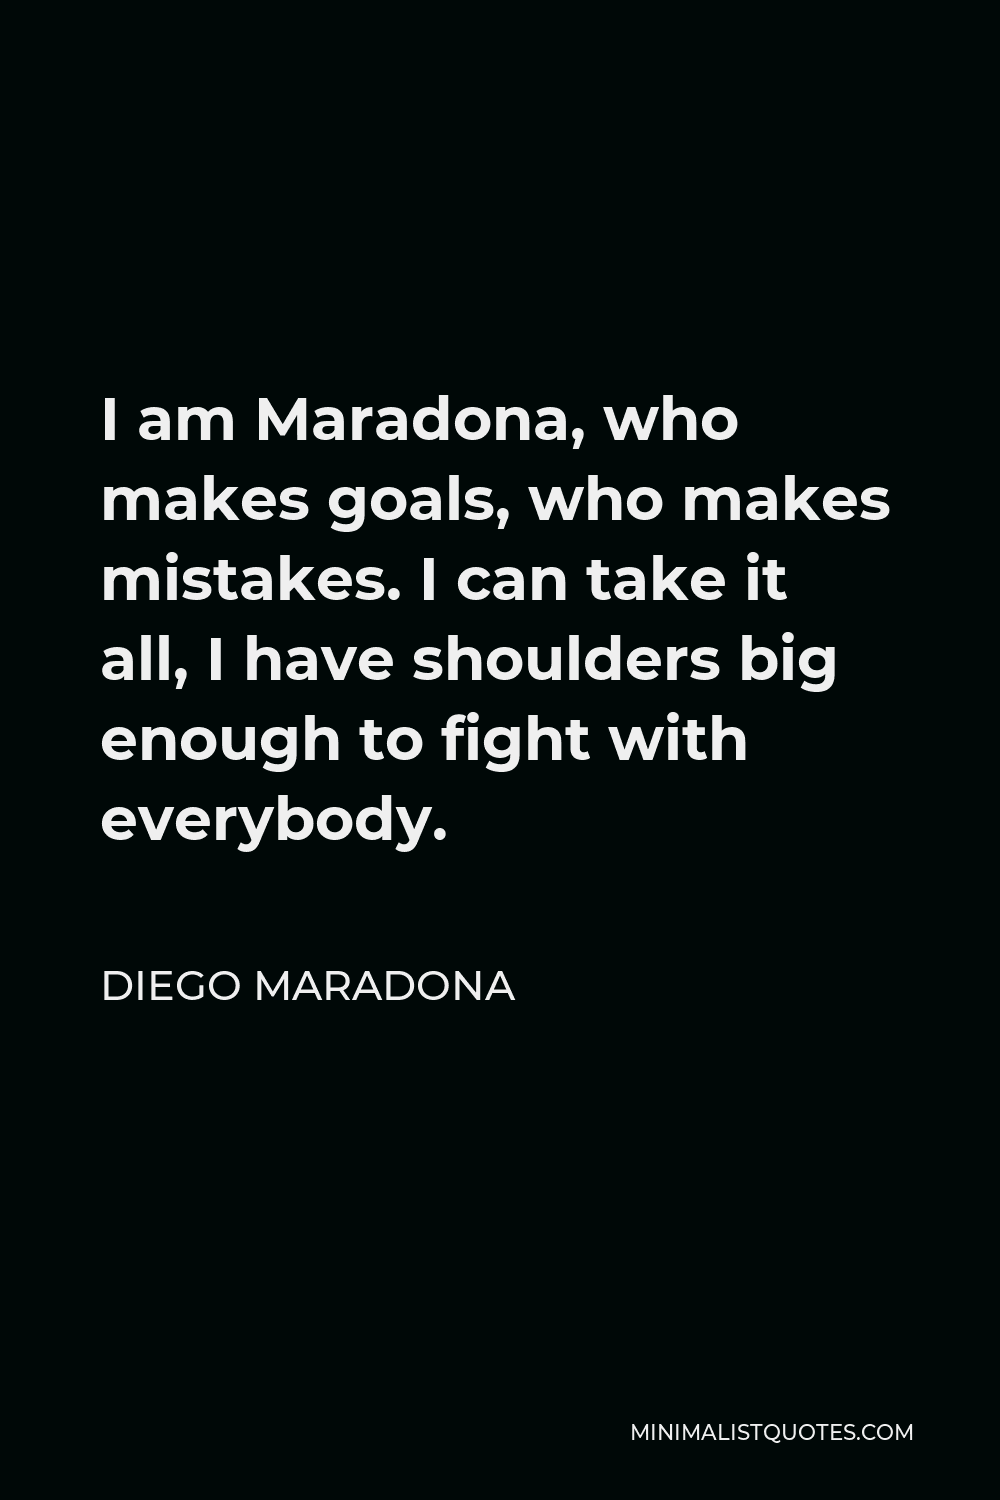 Diego Maradona Quote - I am Maradona, who makes goals, who makes mistakes. I can take it all, I have shoulders big enough to fight with everybody.